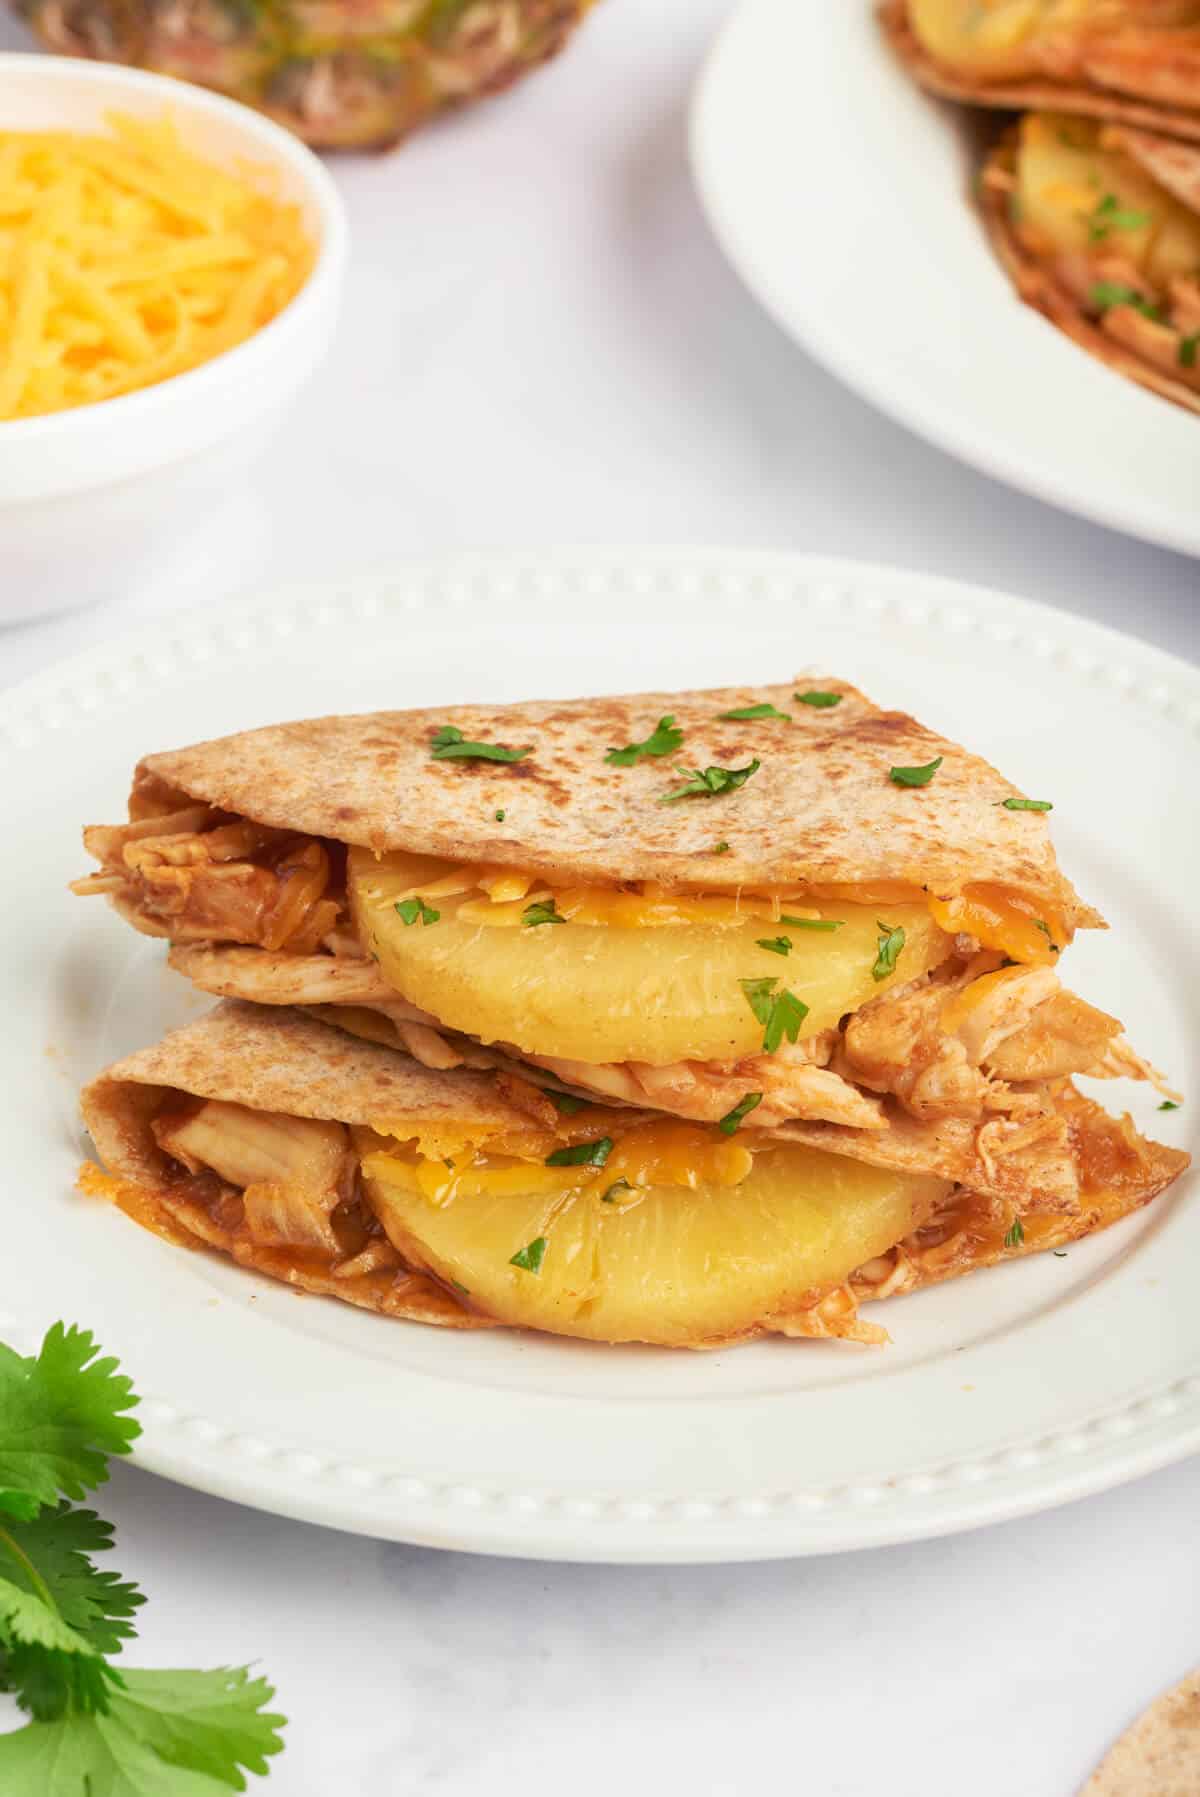 A plate of bbq chicken and pineapple quesadillas.